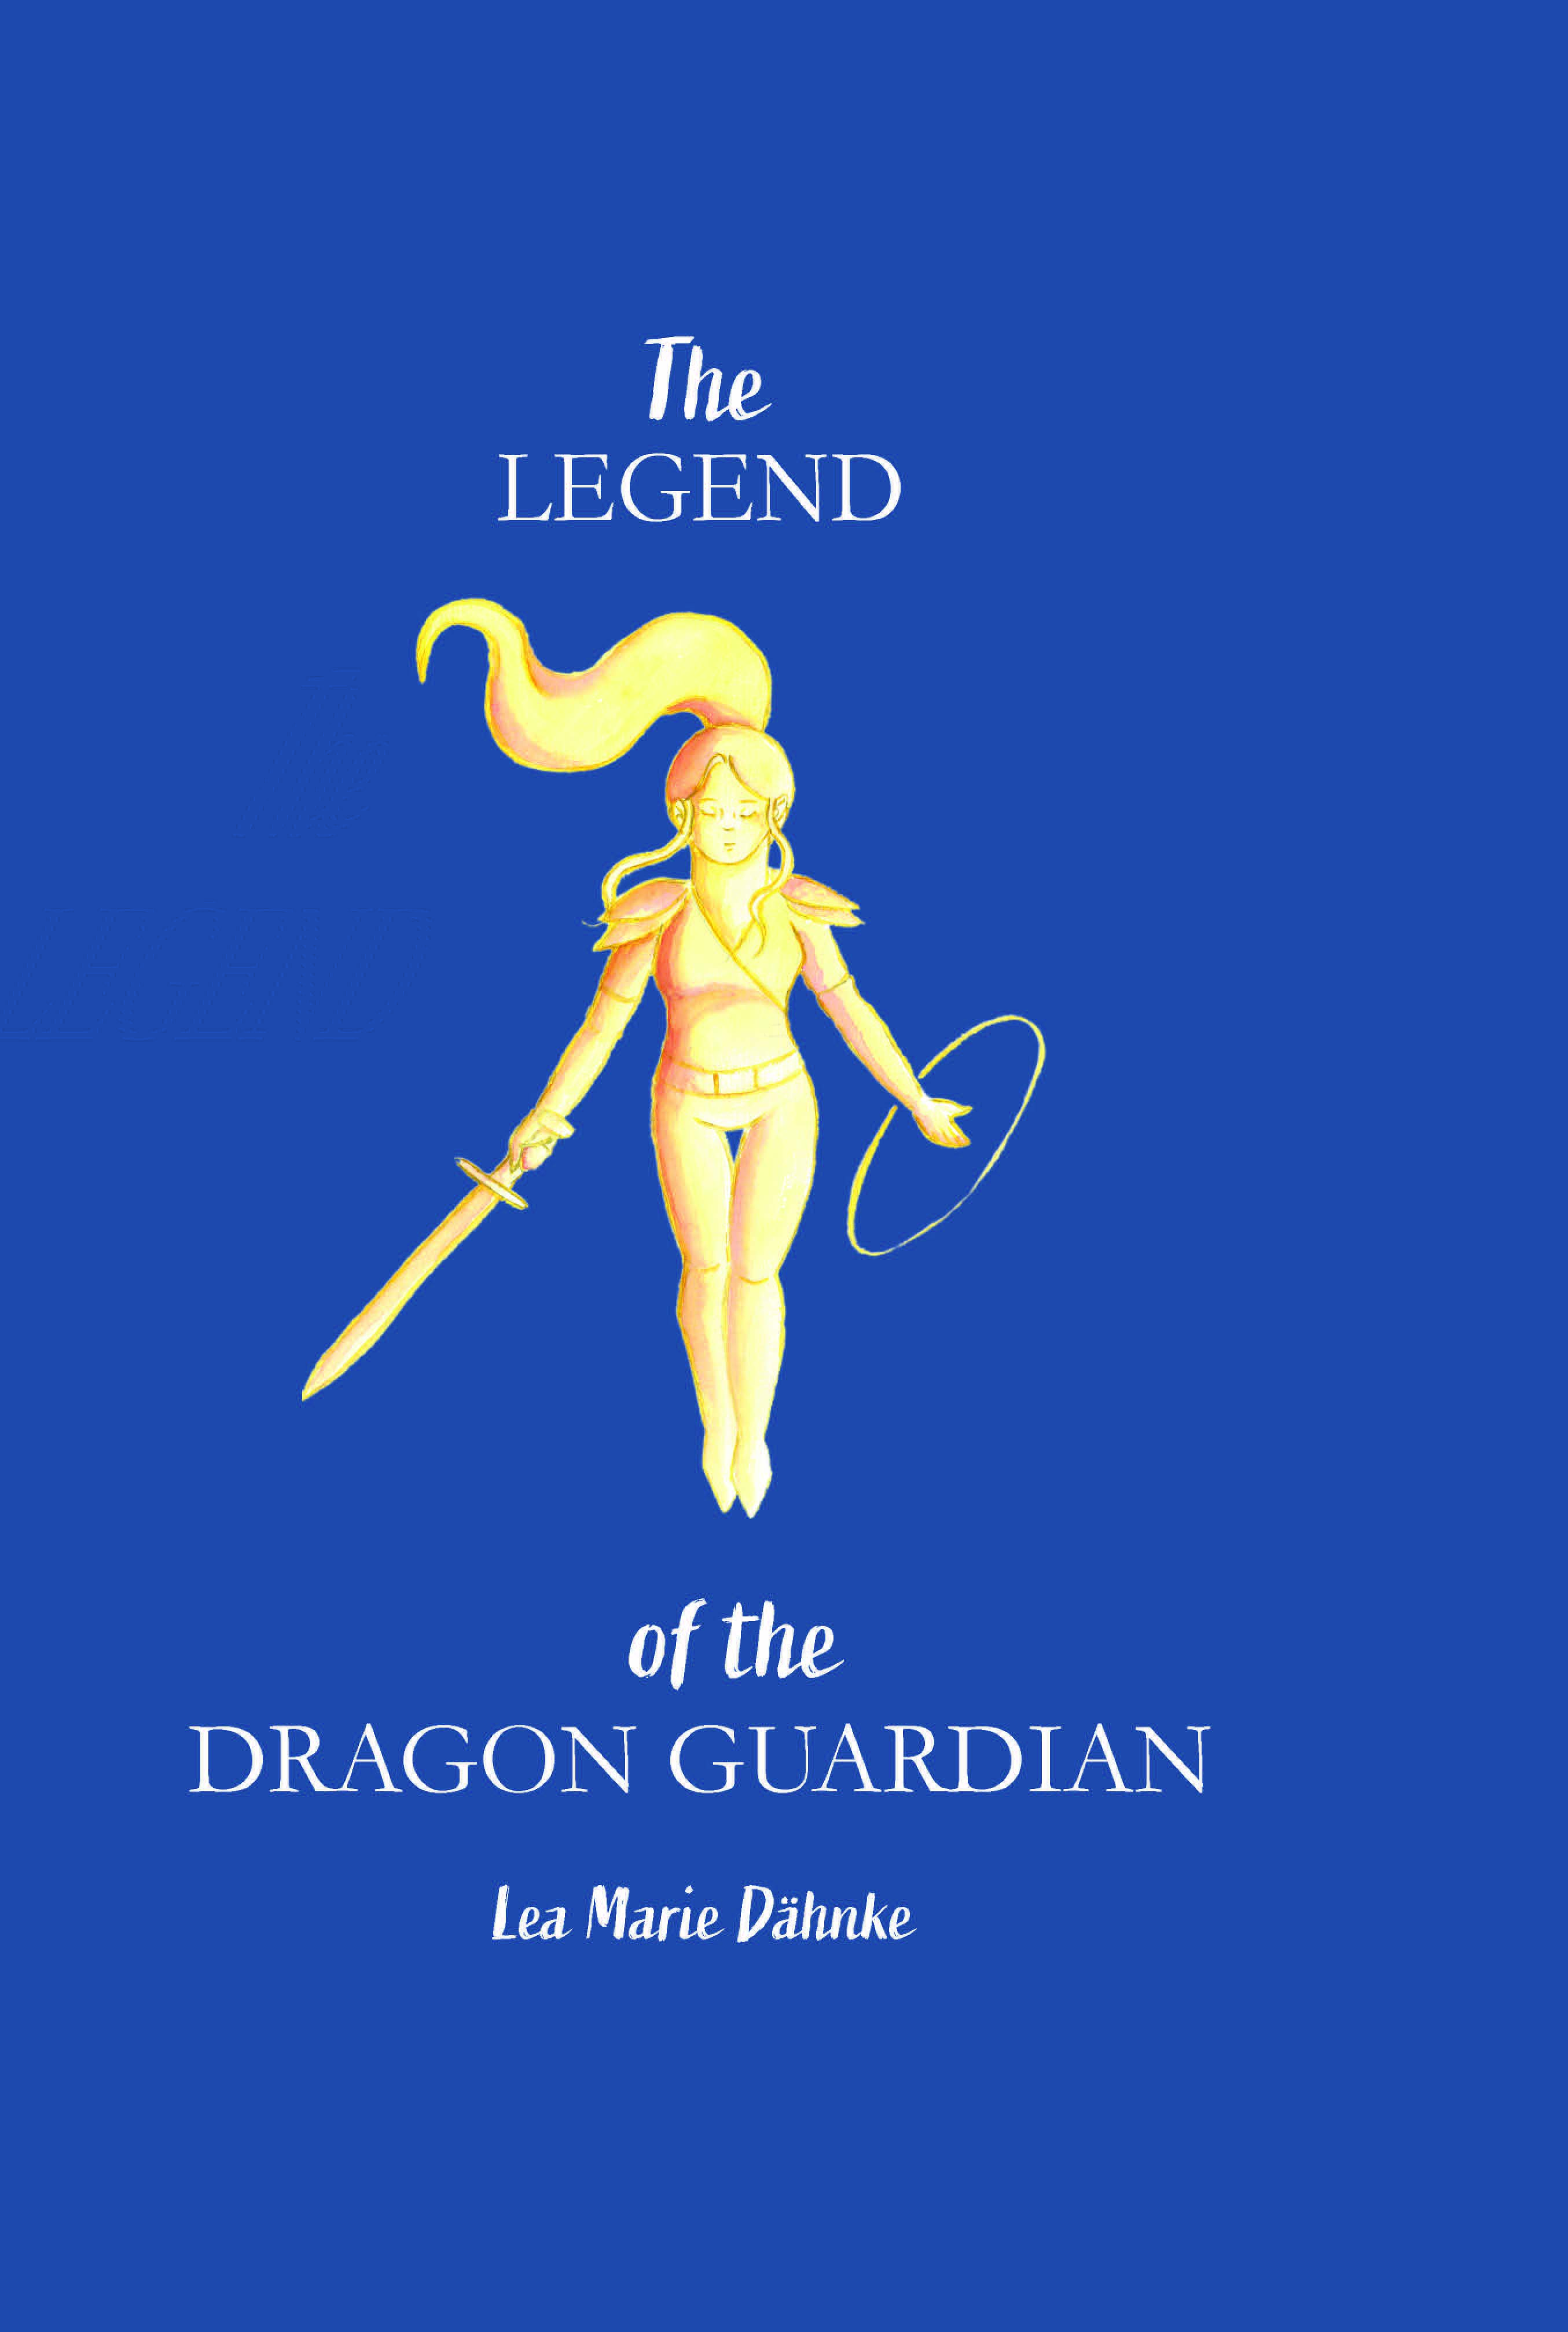 The Legend of the dragon Guardian